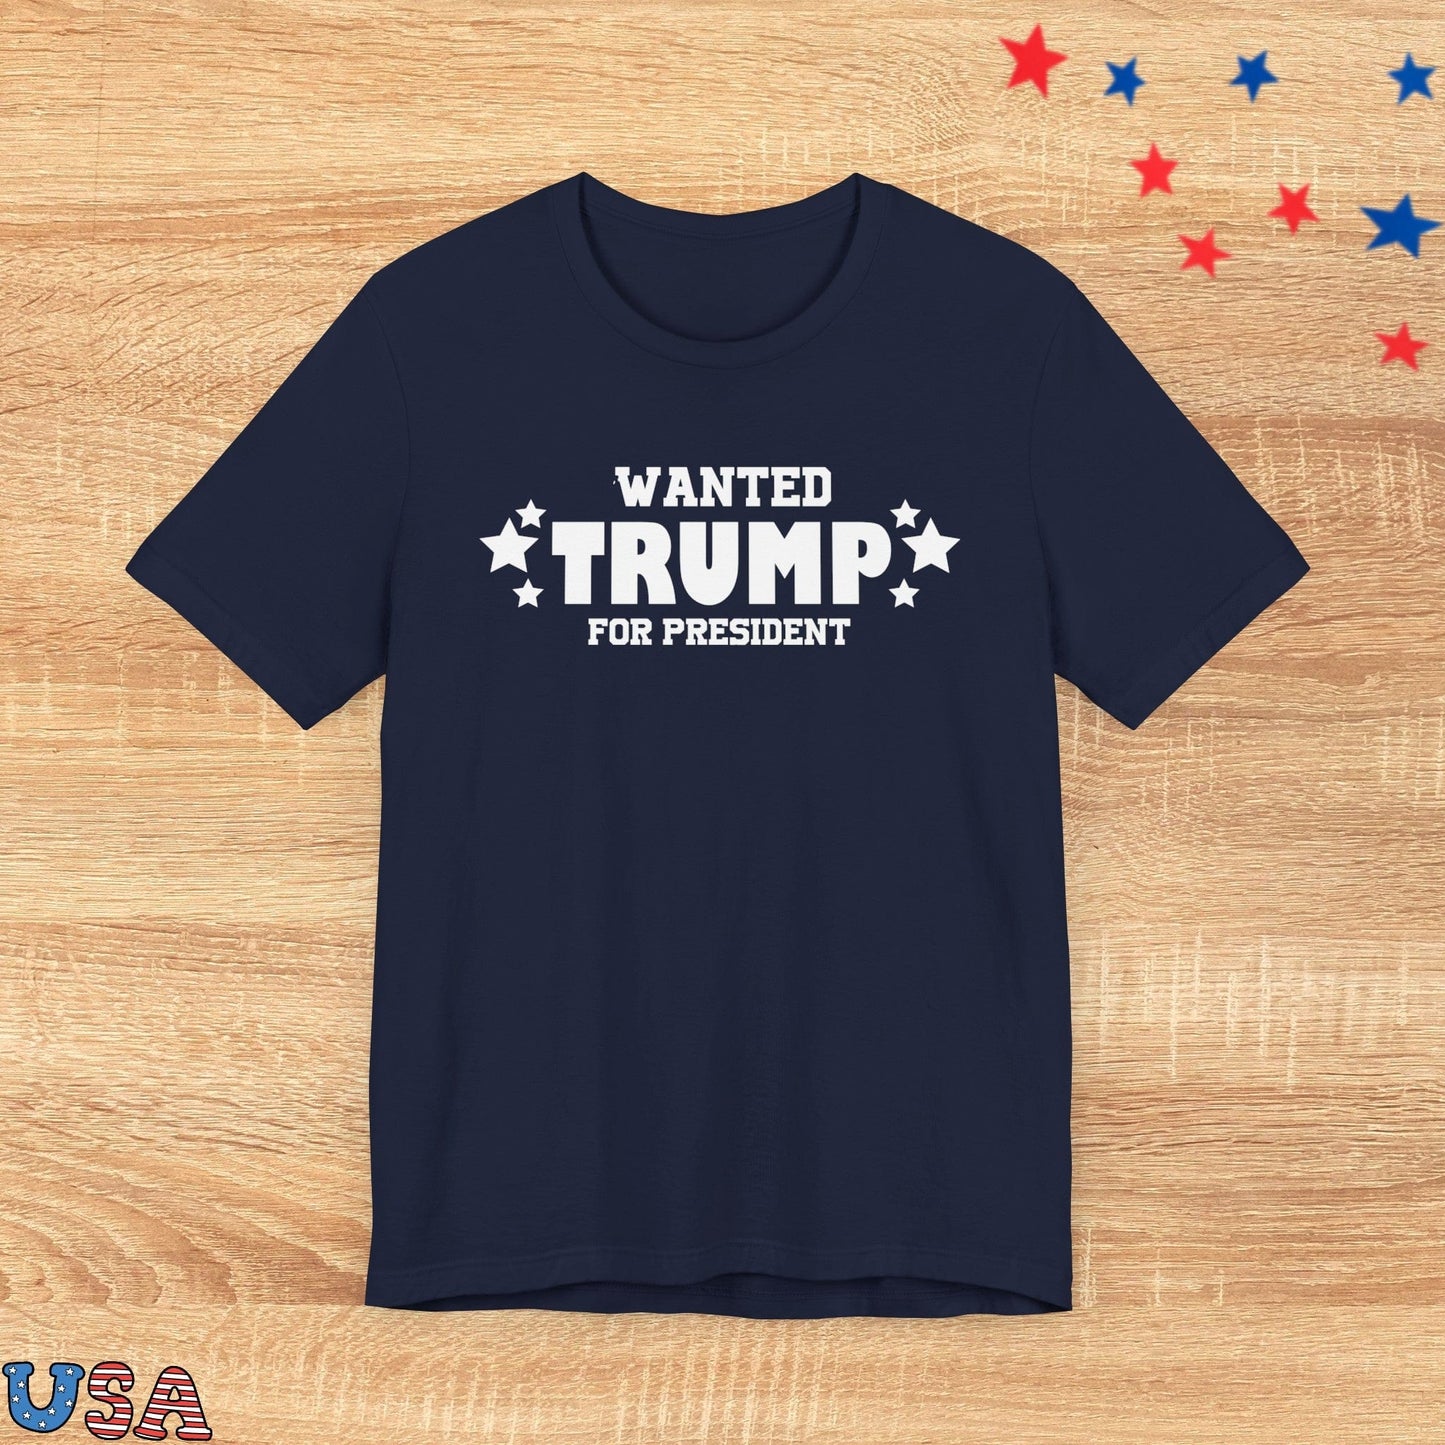 patriotic stars T-Shirt Navy / XS Wanted Trump For President